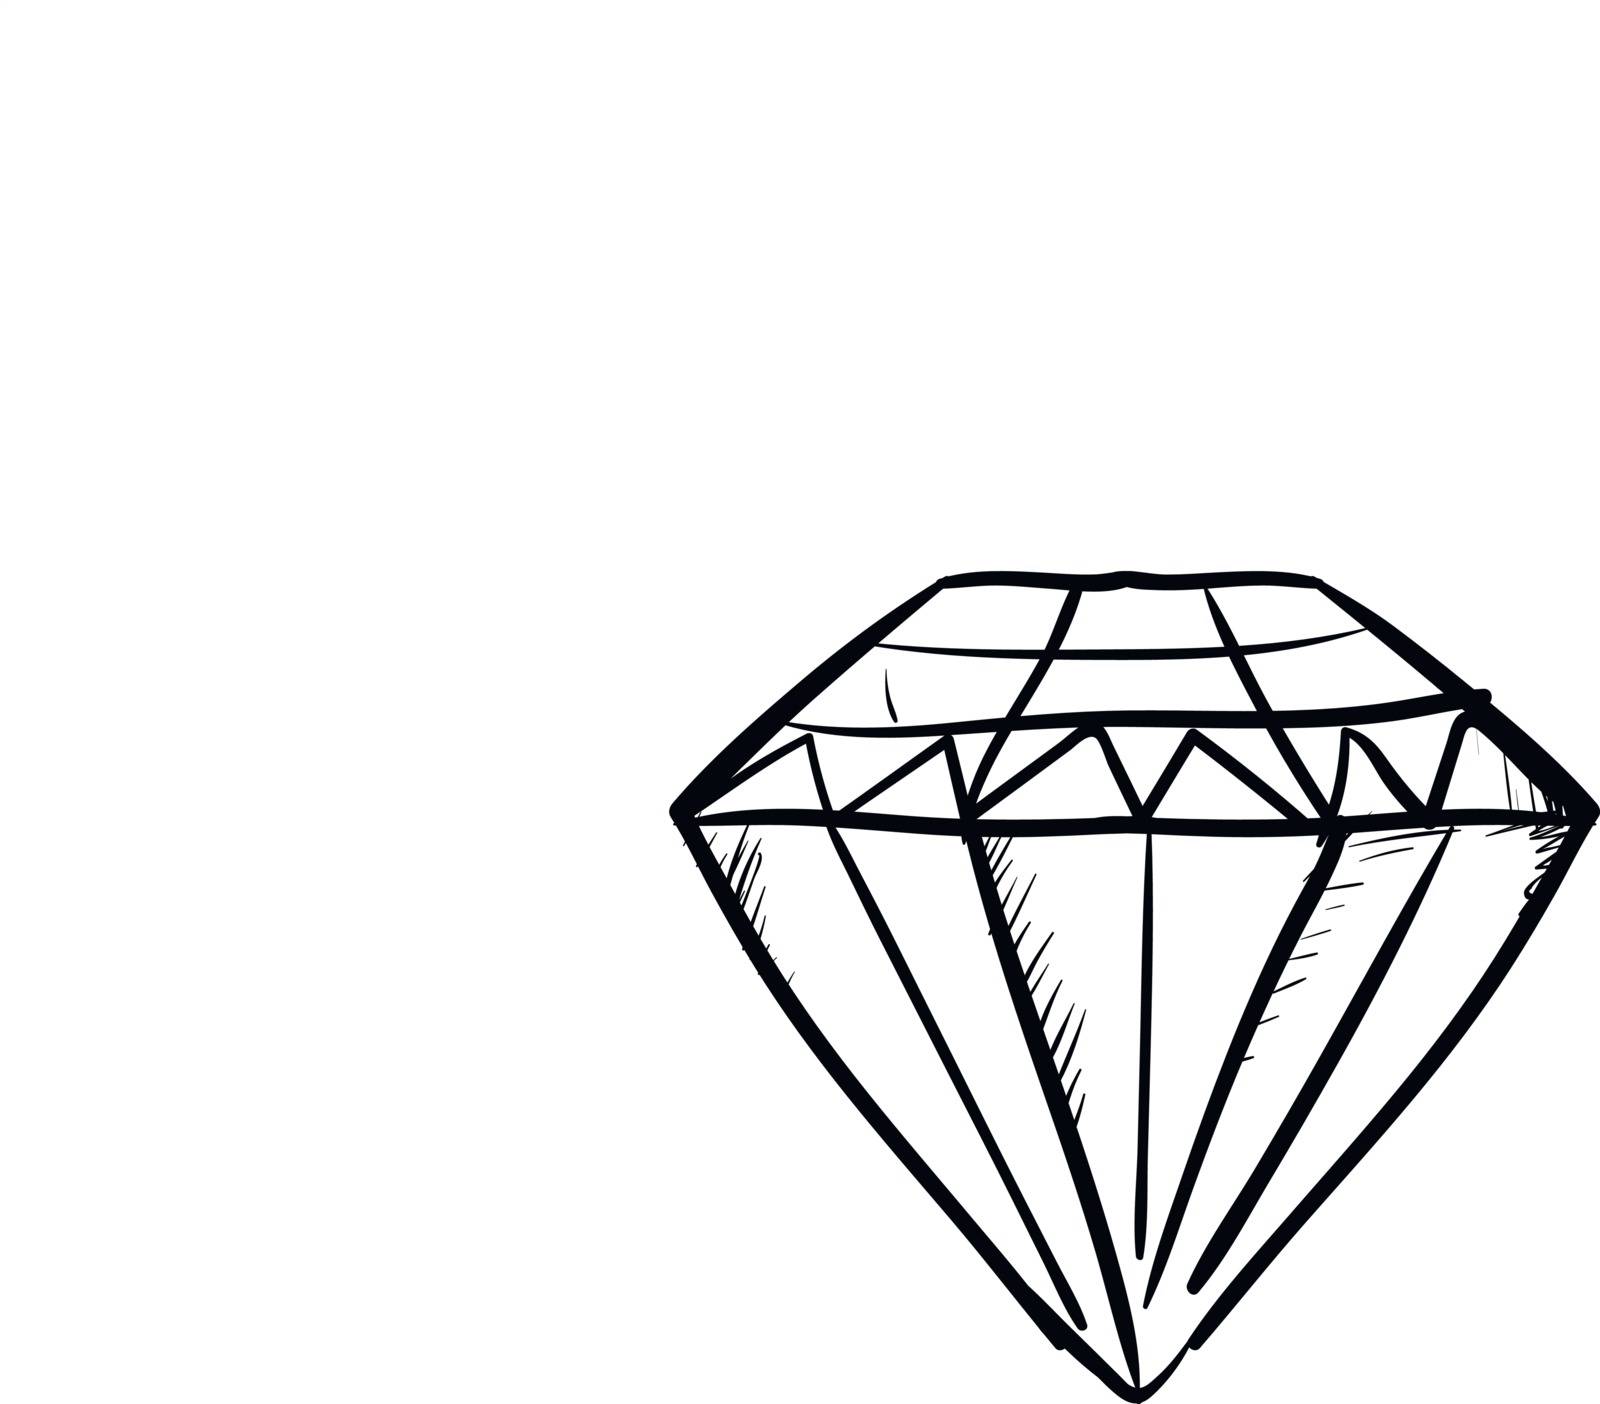 A sketch of a diamond in black pencil , vector, color drawing or illustration.